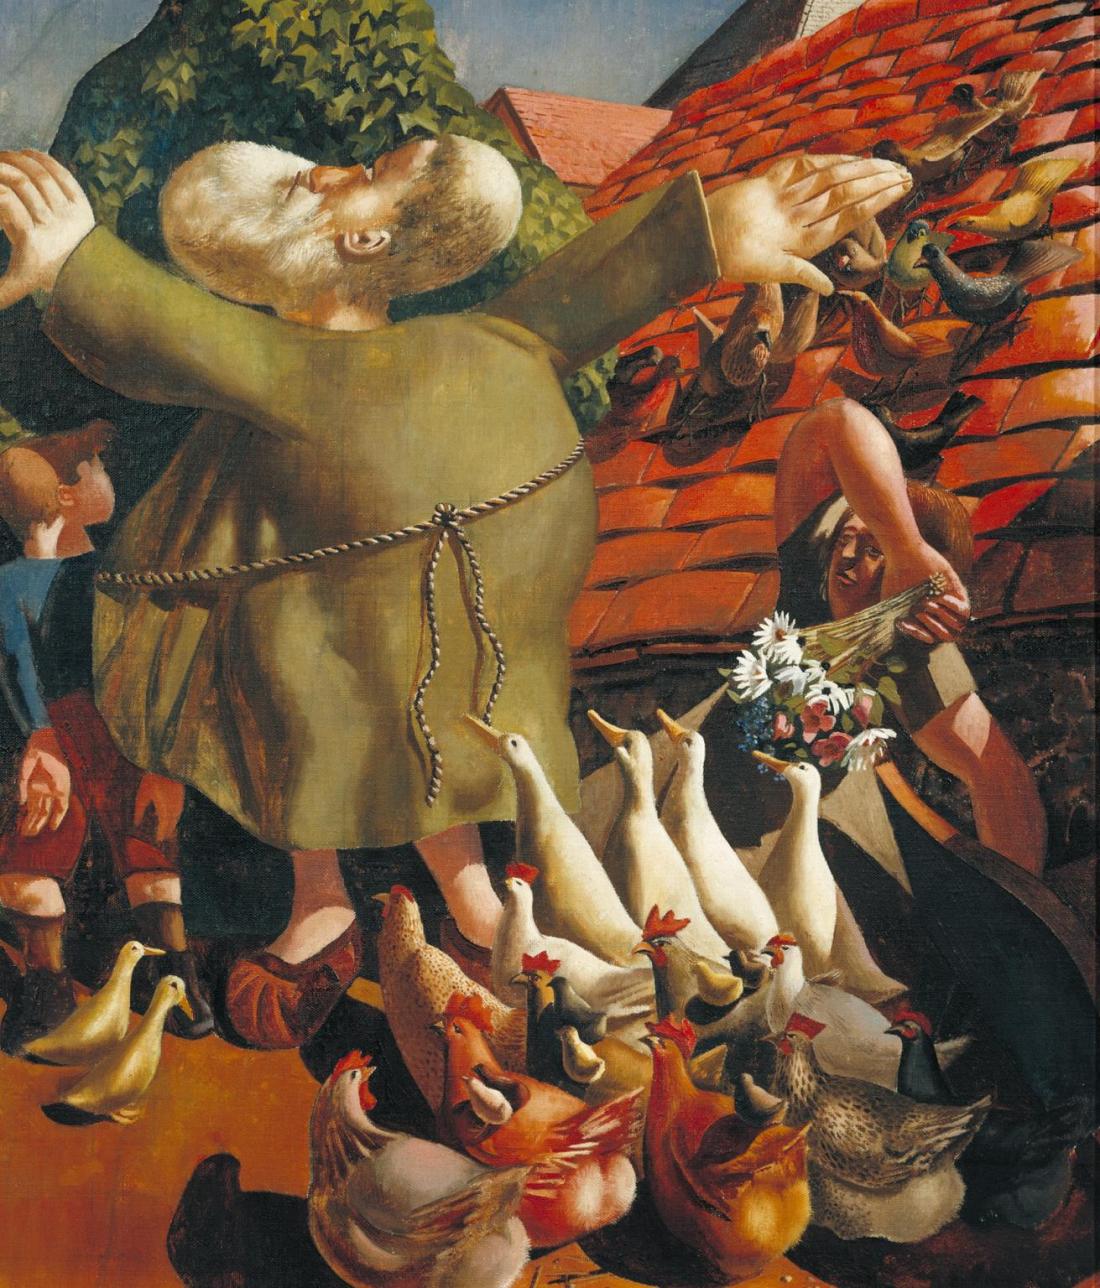 St Francis and the Birds 1935 by Sir Stanley Spencer 1891-1959